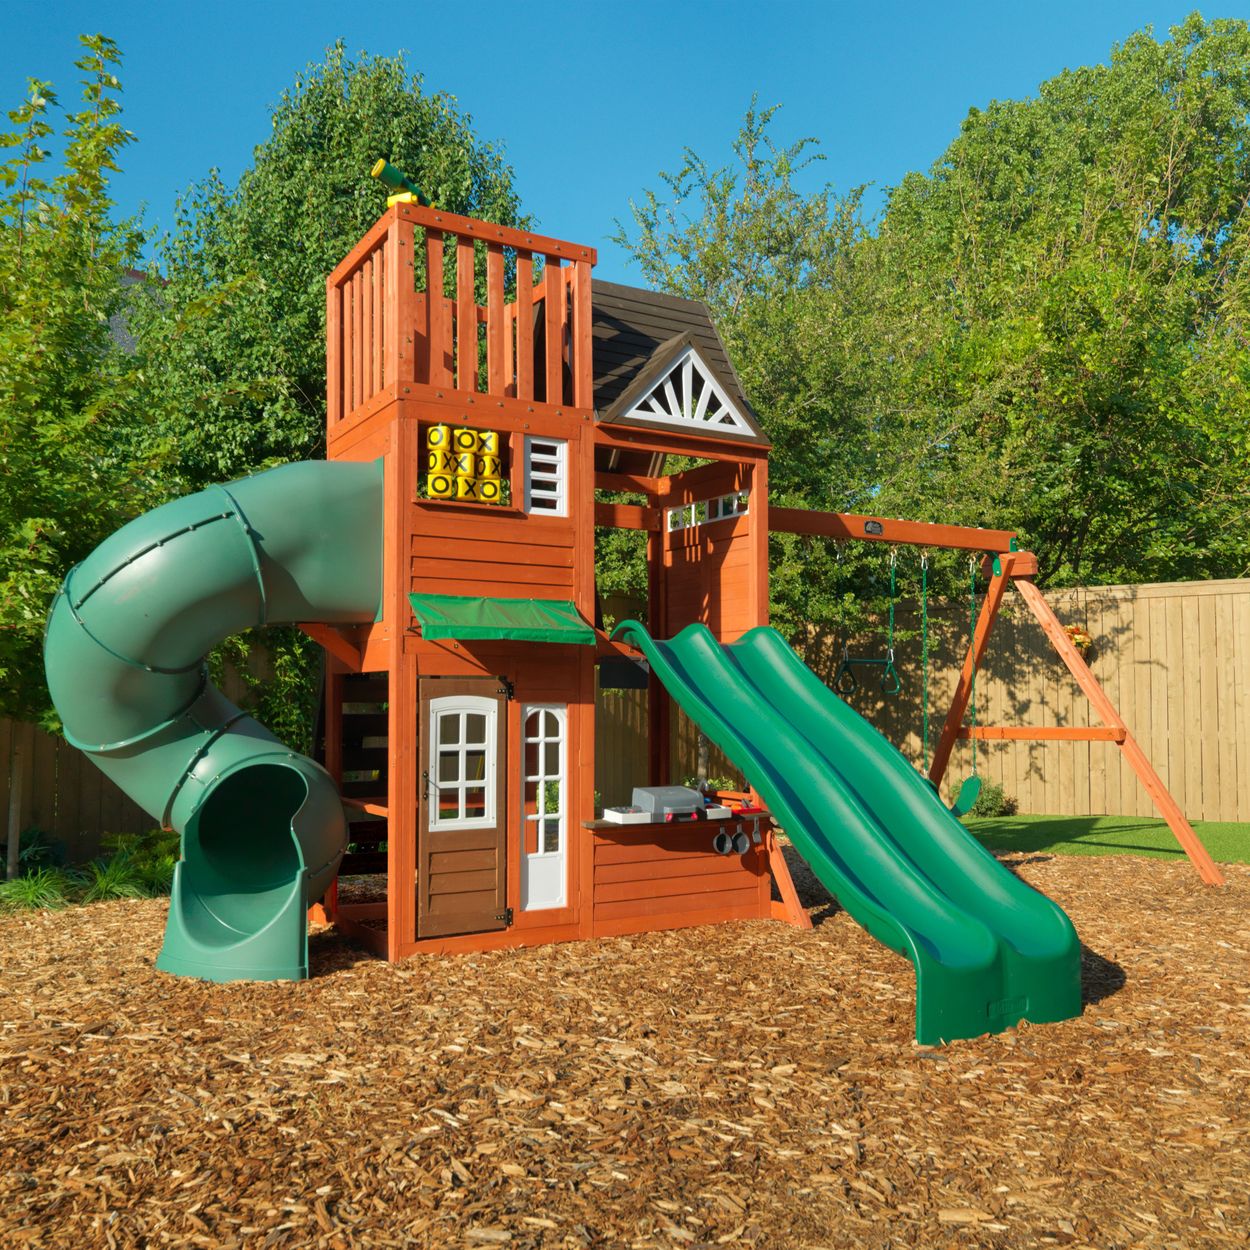 Costco Childrens Outdoor Playsets For, Children S Outdoor Play Equipment Costco